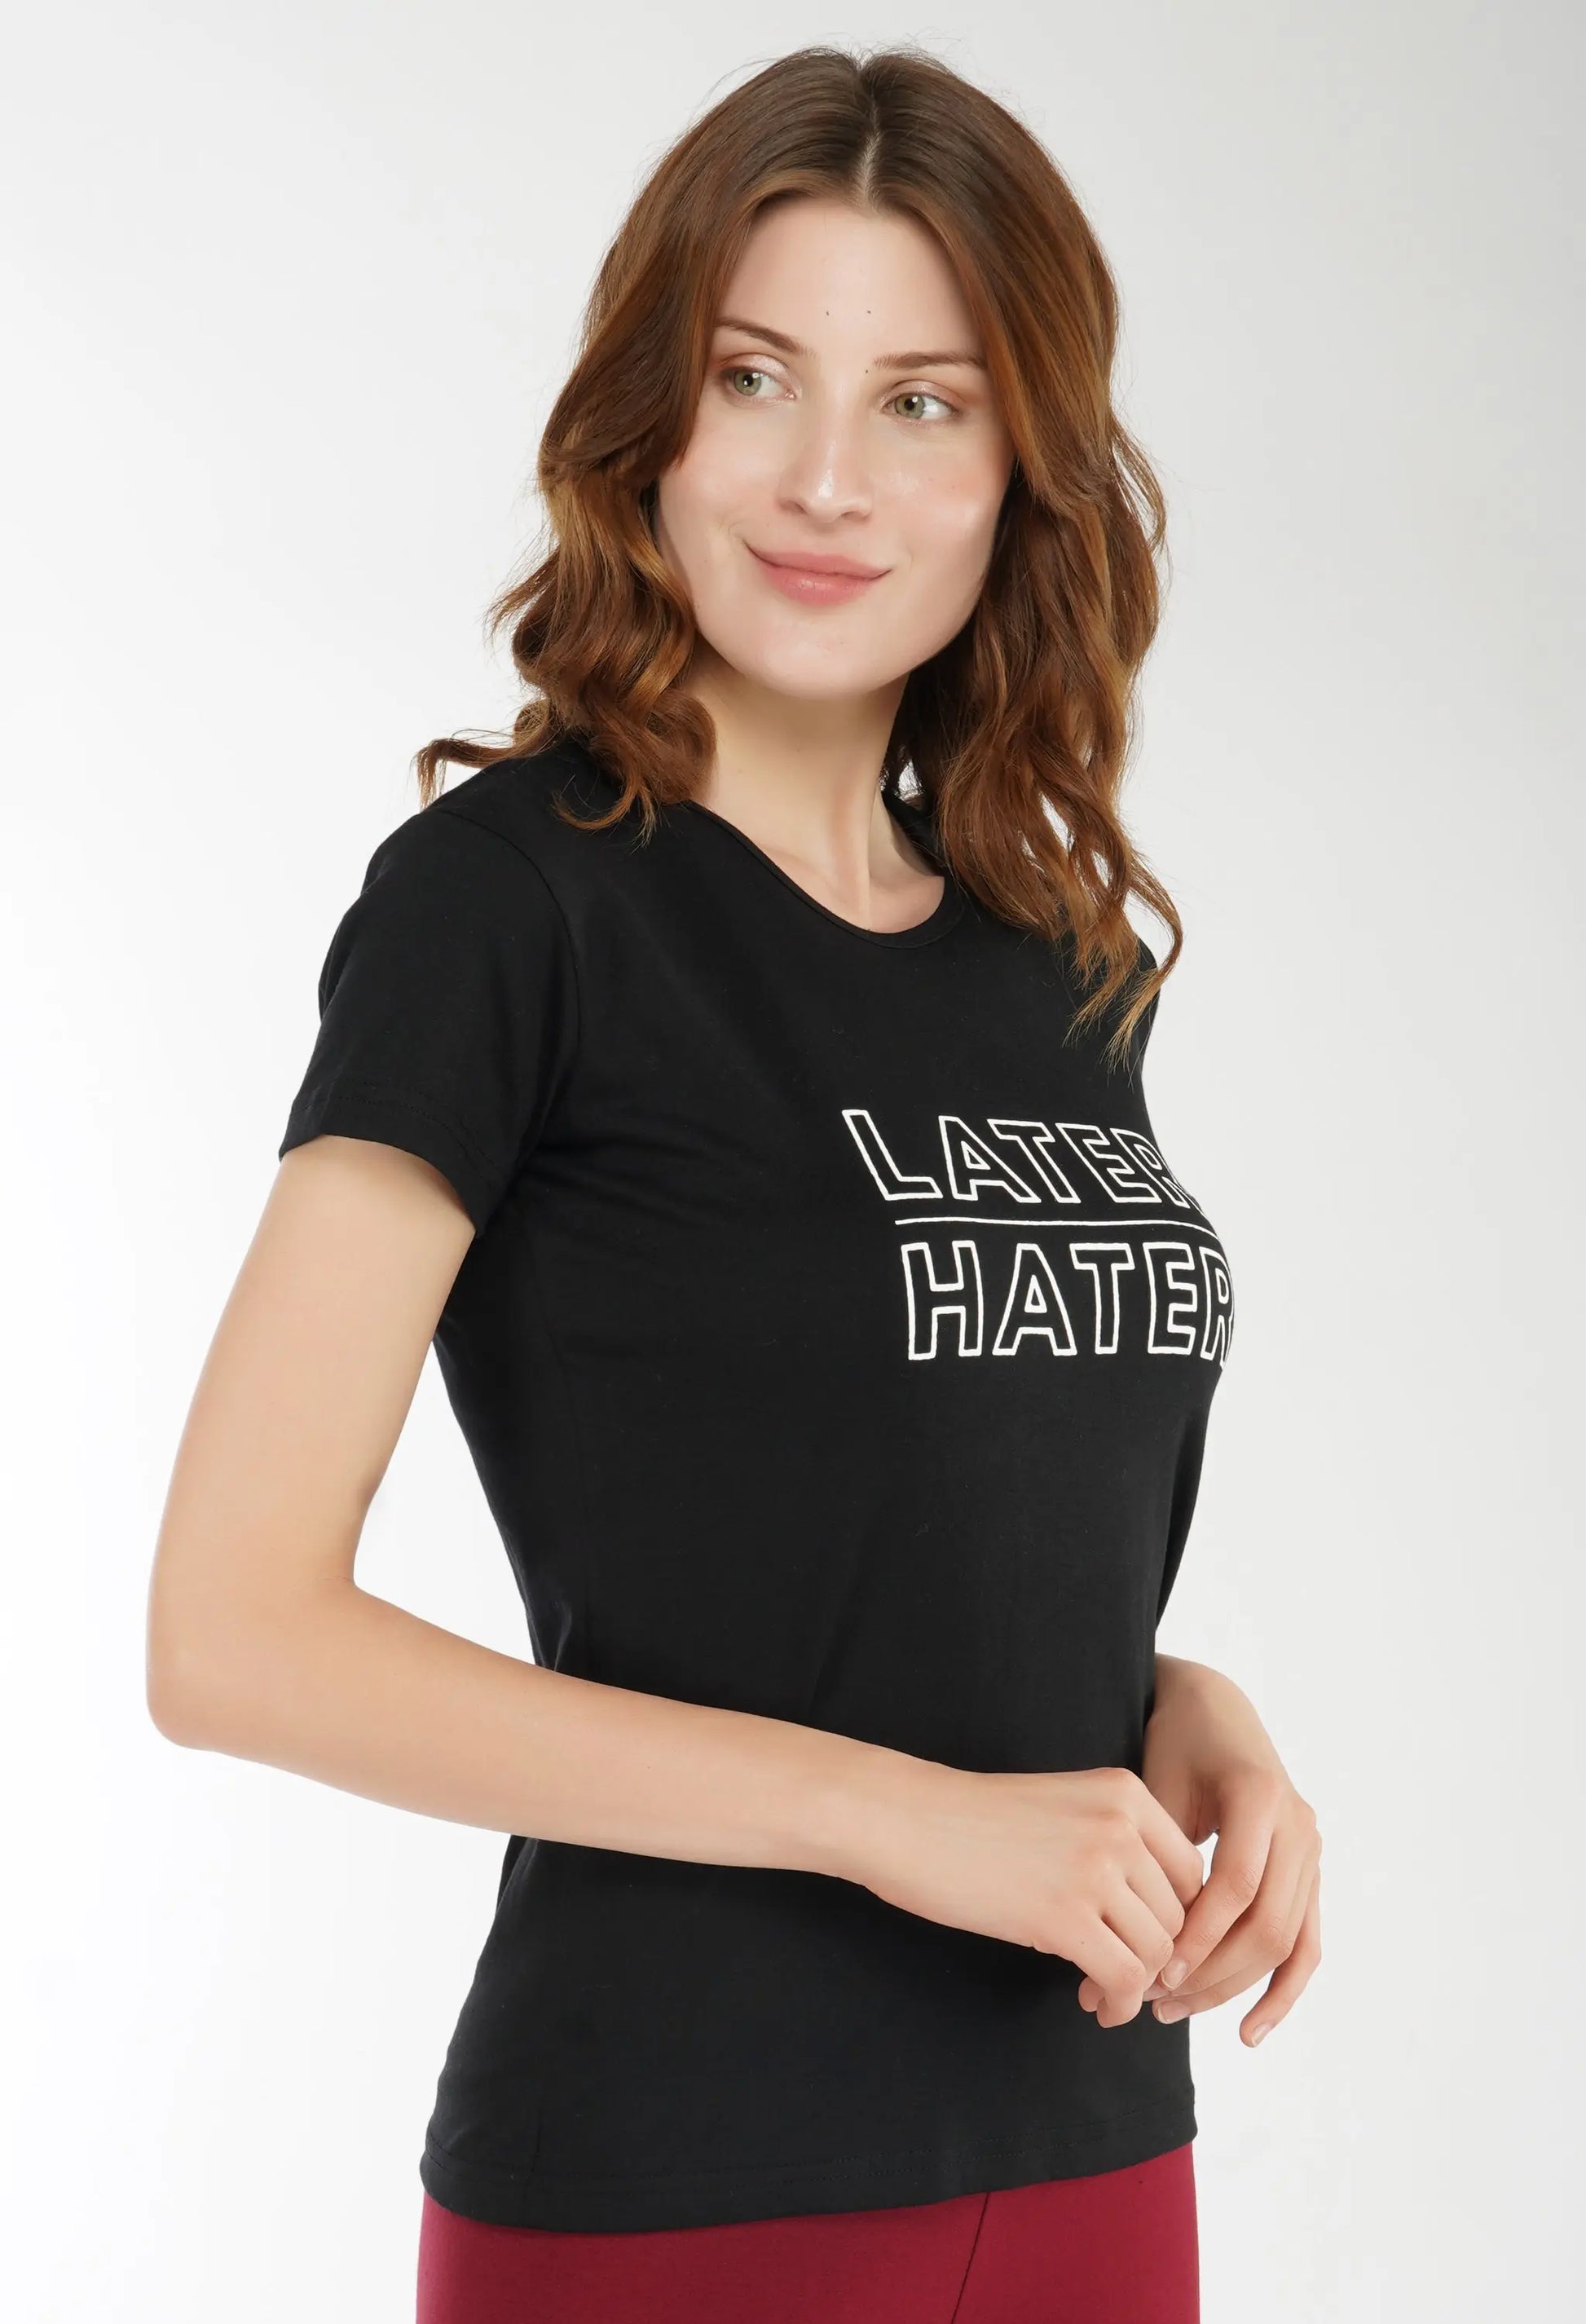 Later Hater - Women Tee Strong Soul T Shirt